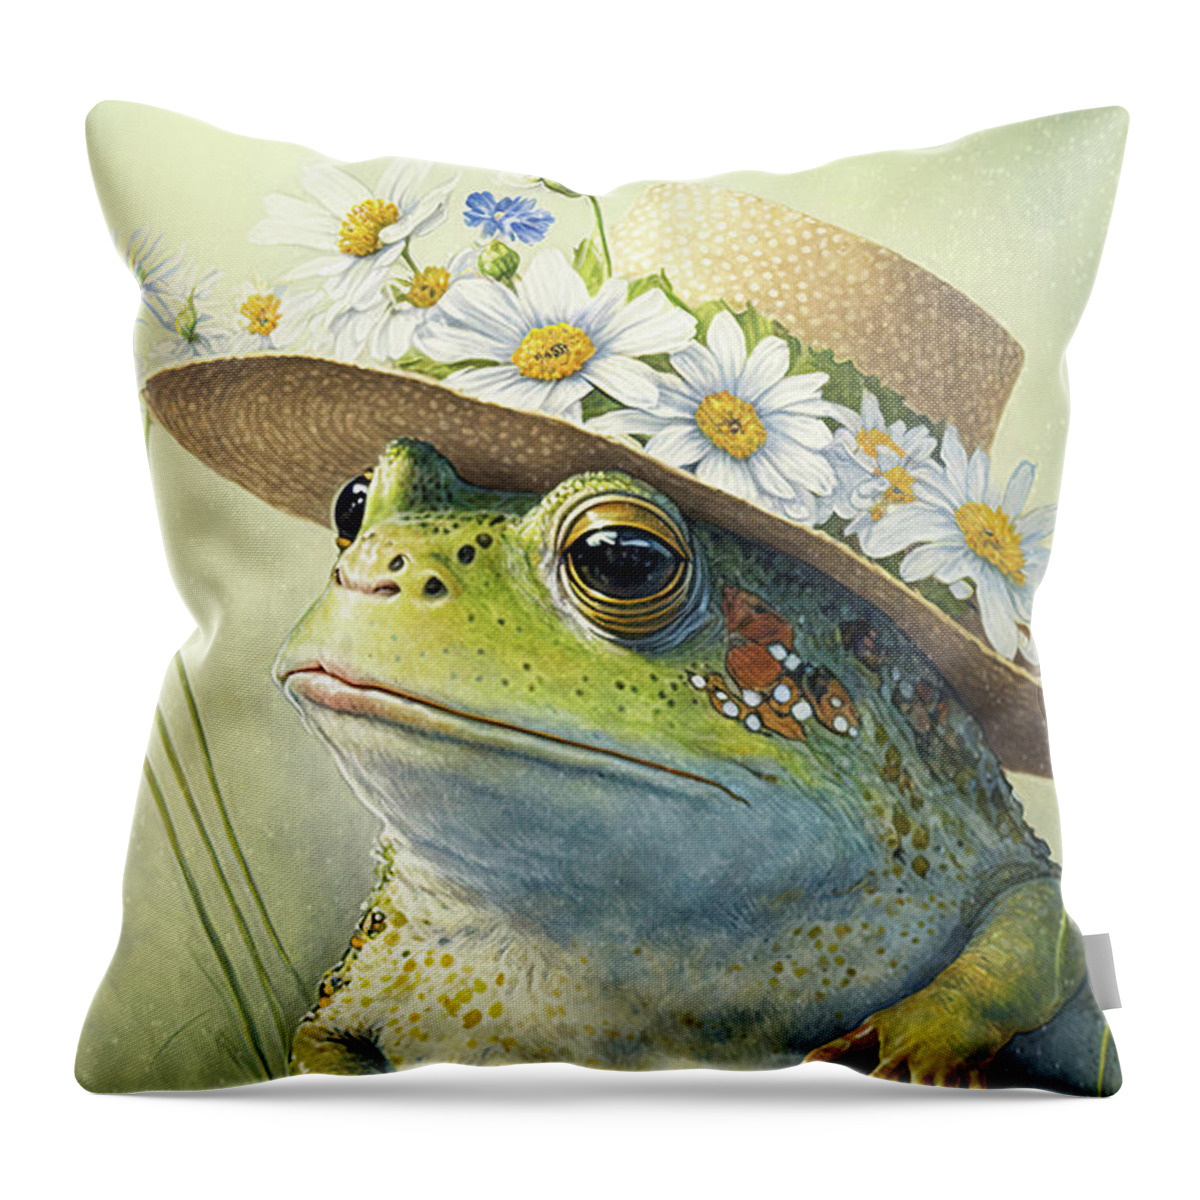 Frog Throw Pillow featuring the painting Ready For The Garden by Tina LeCour